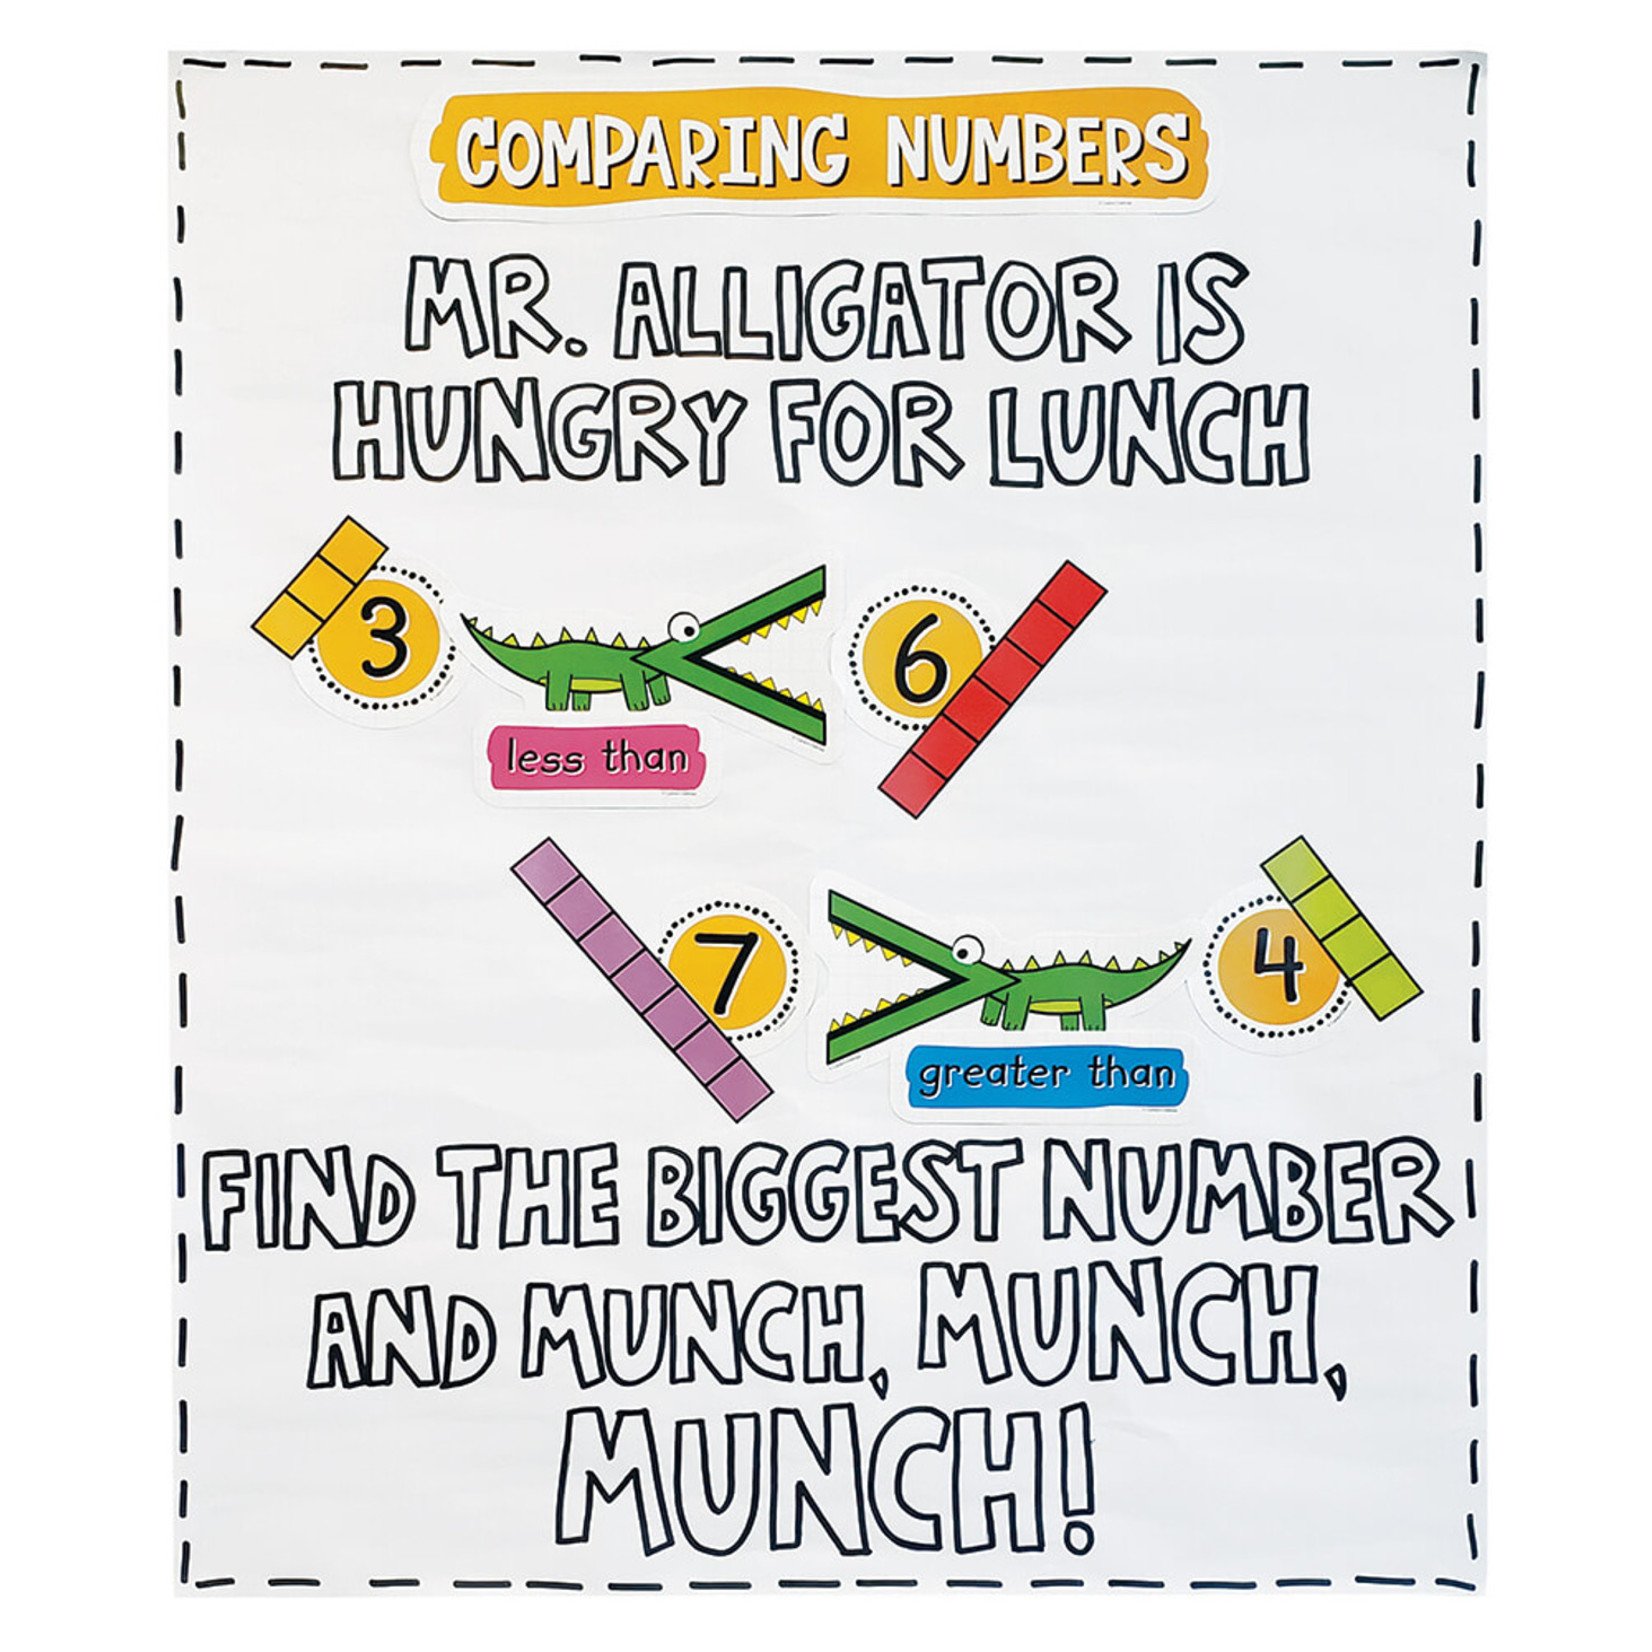 CARSON DELLOSA PUBLISHING CO Easy Anchor Charts: Working with Numbers Bulletin Board Set Grade K-2